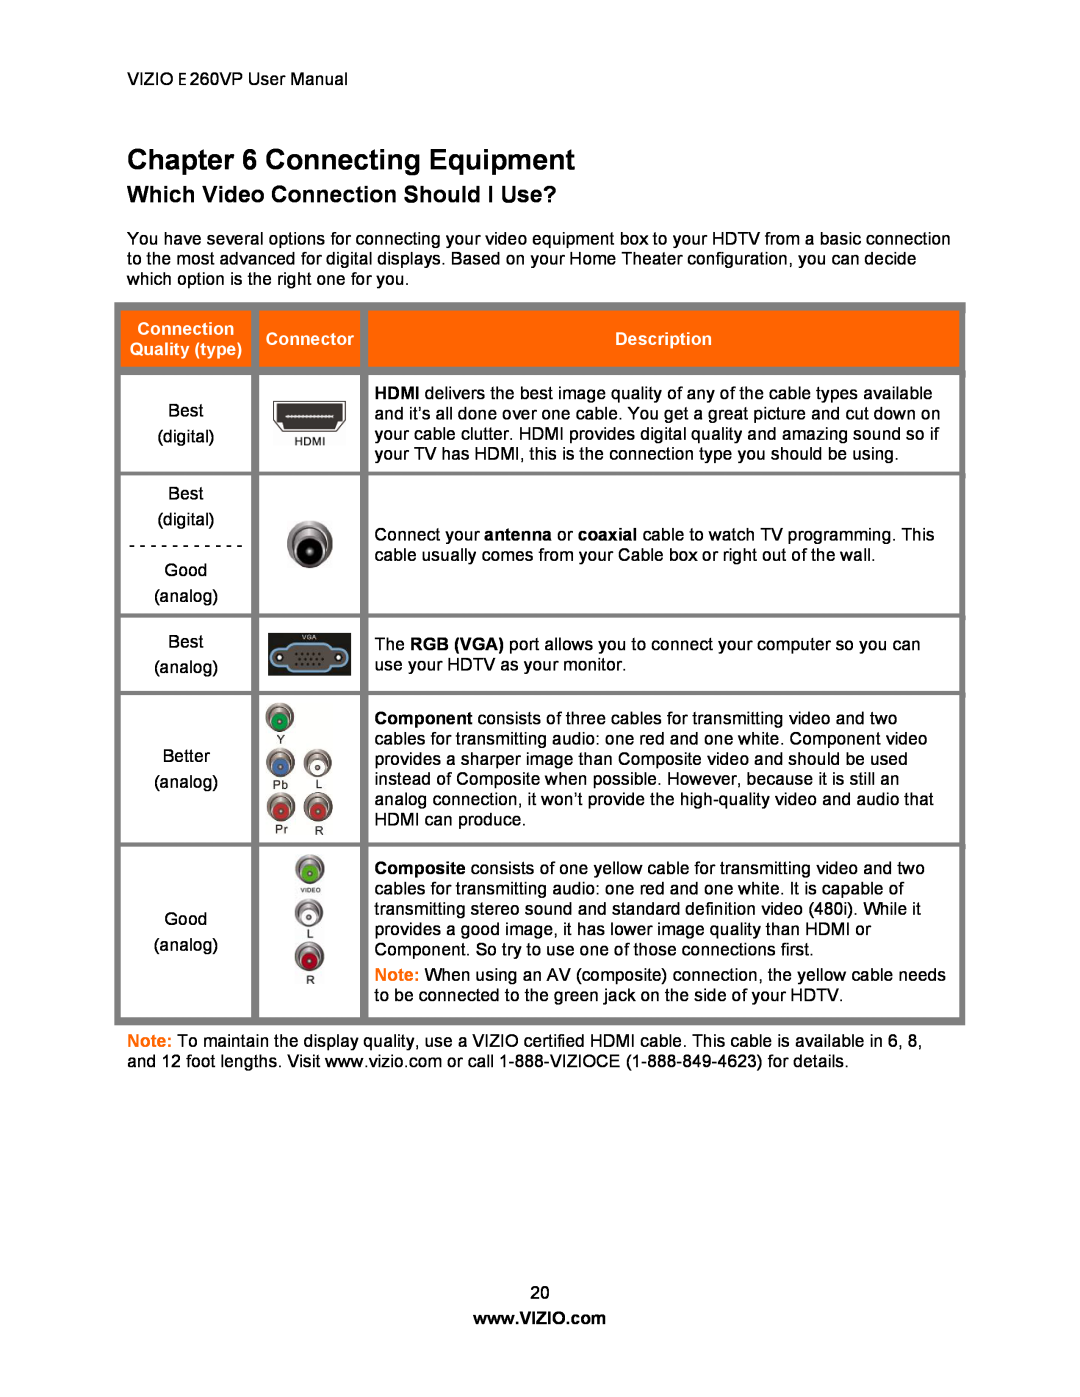 Vizio E260VP user manual Connecting Equipment, Which Video Connection Should I Use?, Connector, Description, Quality type 